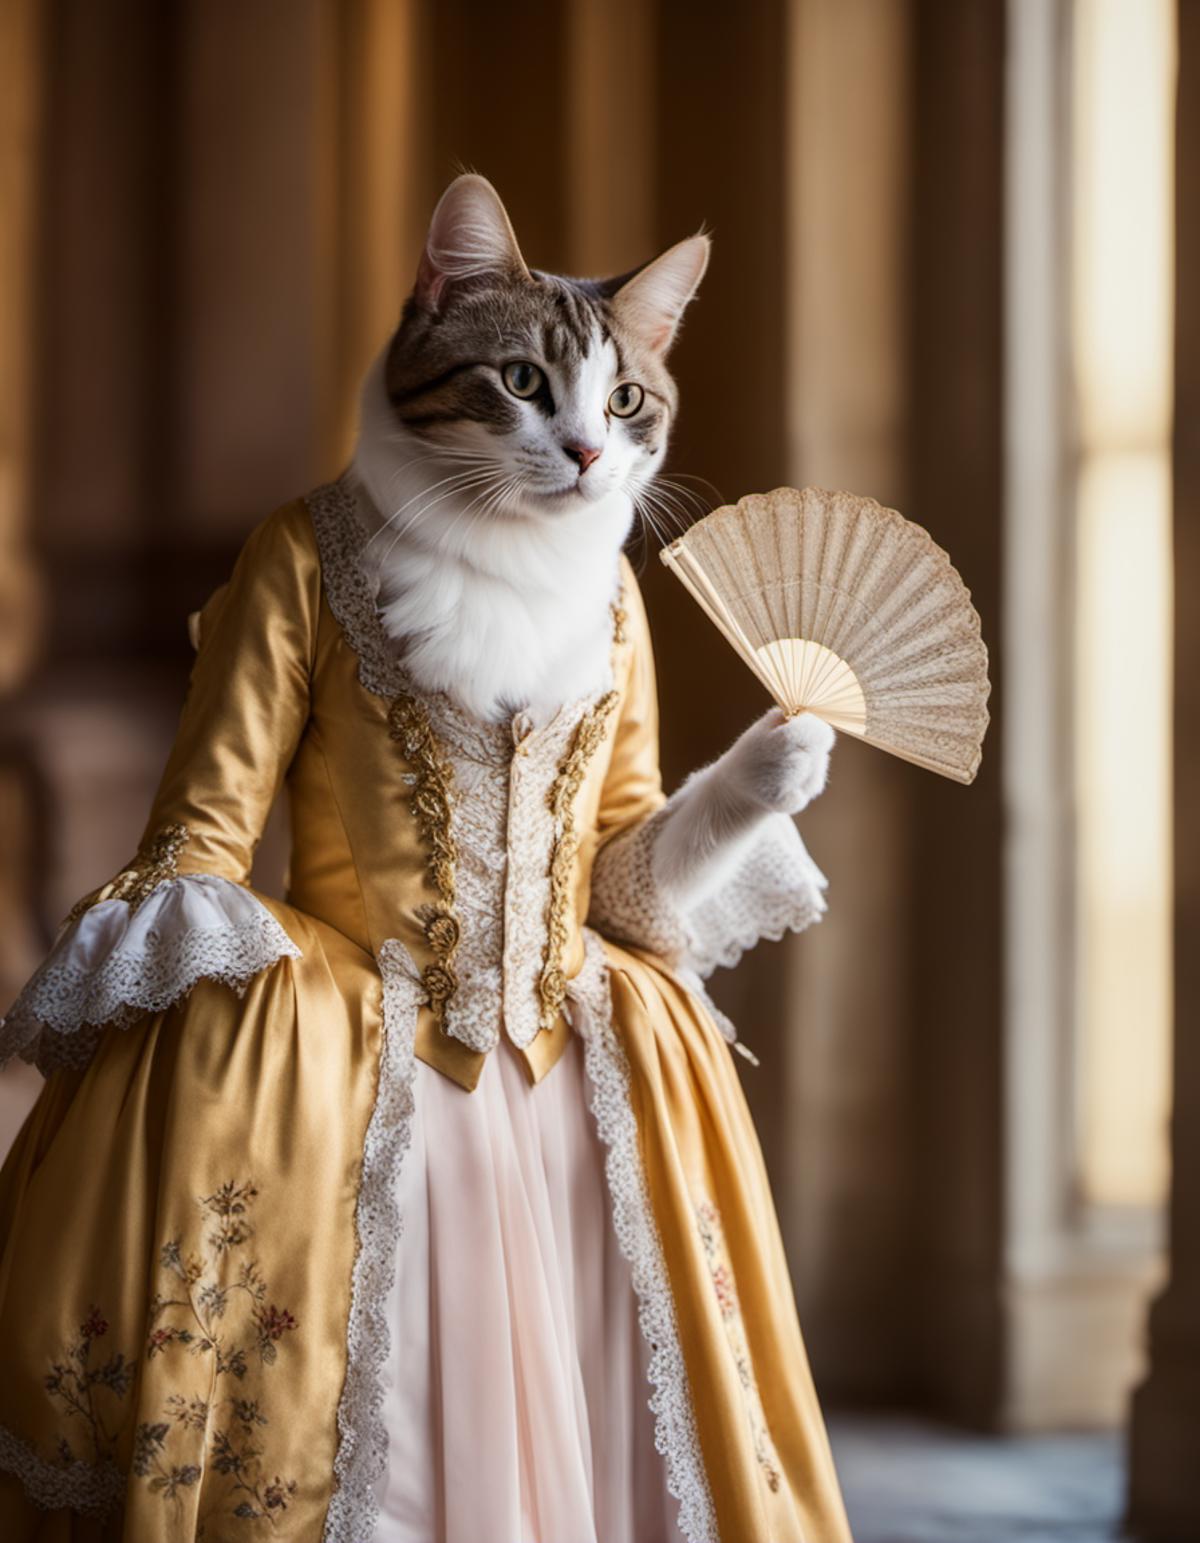 A cat wearing a dress and holding a fan.